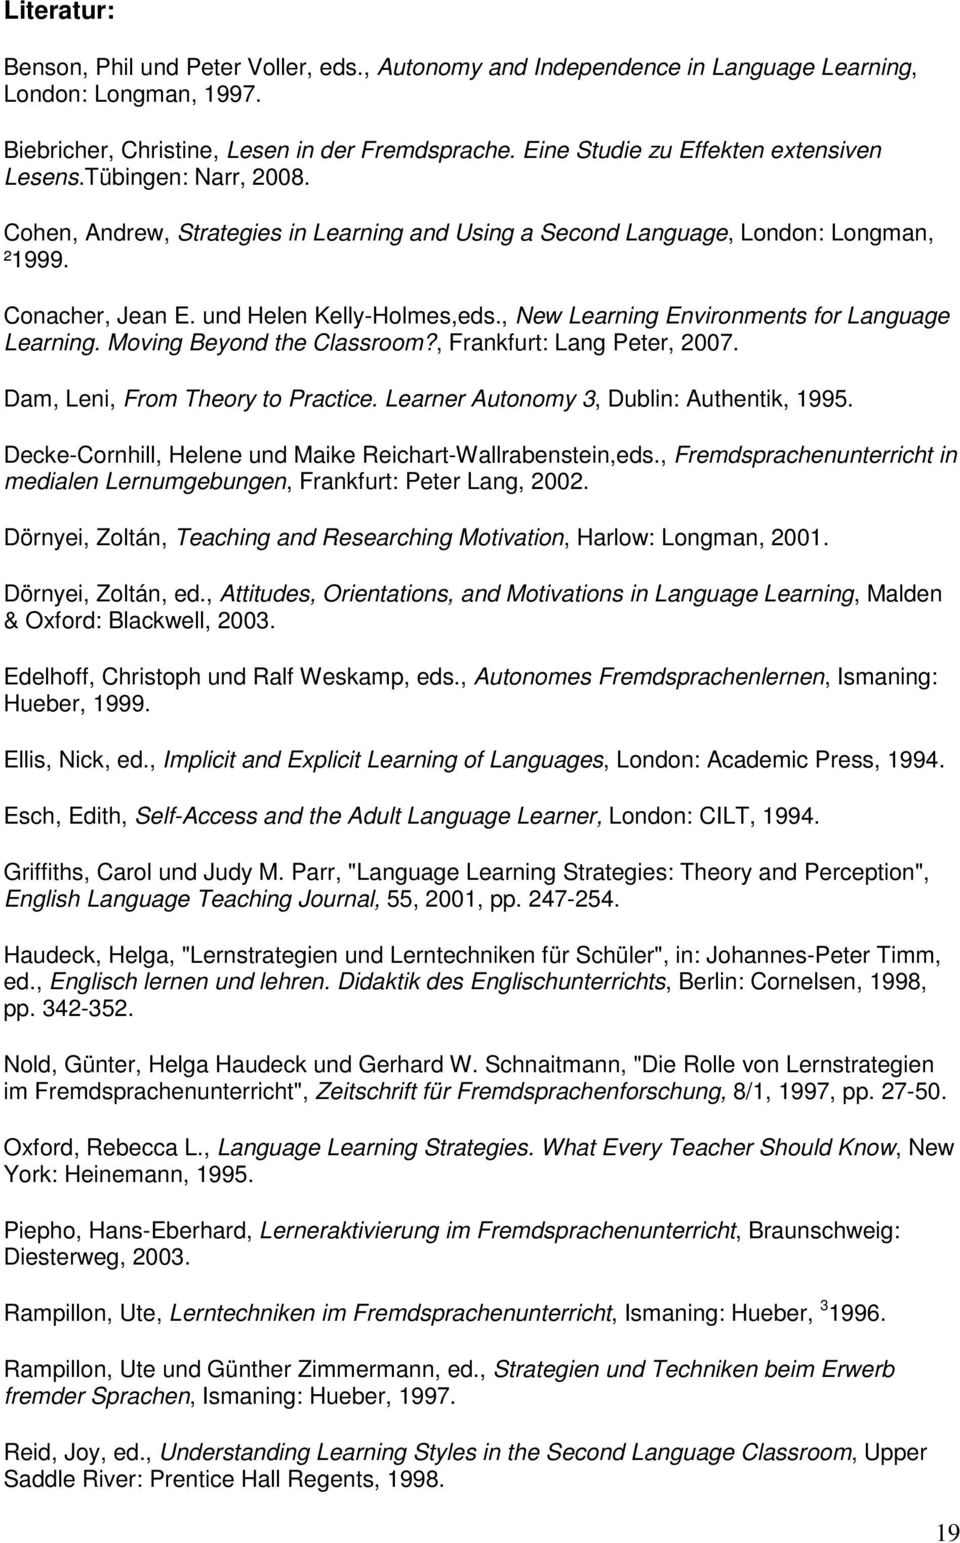 , New Learning Environments for Language Learning. Moving Beyond the Classroom?, Frankfurt: Lang Peter, 2007. Dam, Leni, From Theory to Practice. Learner Autonomy 3, Dublin: Authentik, 1995.